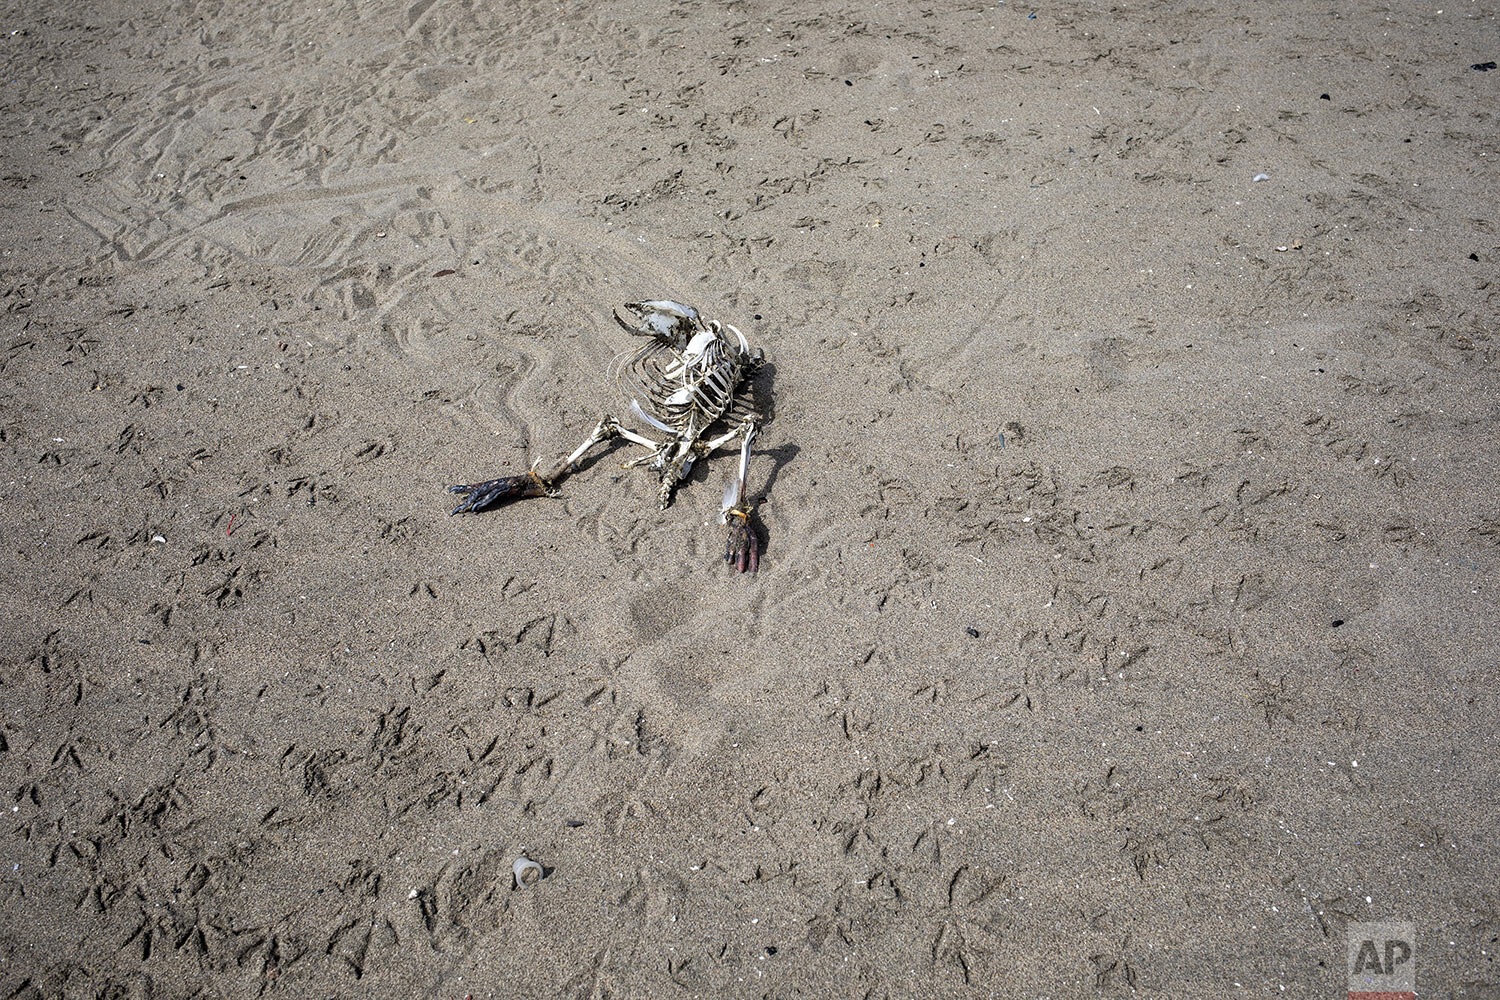  Bird tracks surround a carcass on the shore of Agua Dulce beach in Lima, Peru, March 24, 2020, days after a state of emergency was declared in Peru in response to the new coronavirus outbreak. (AP Photo/Rodrigo Abd) 